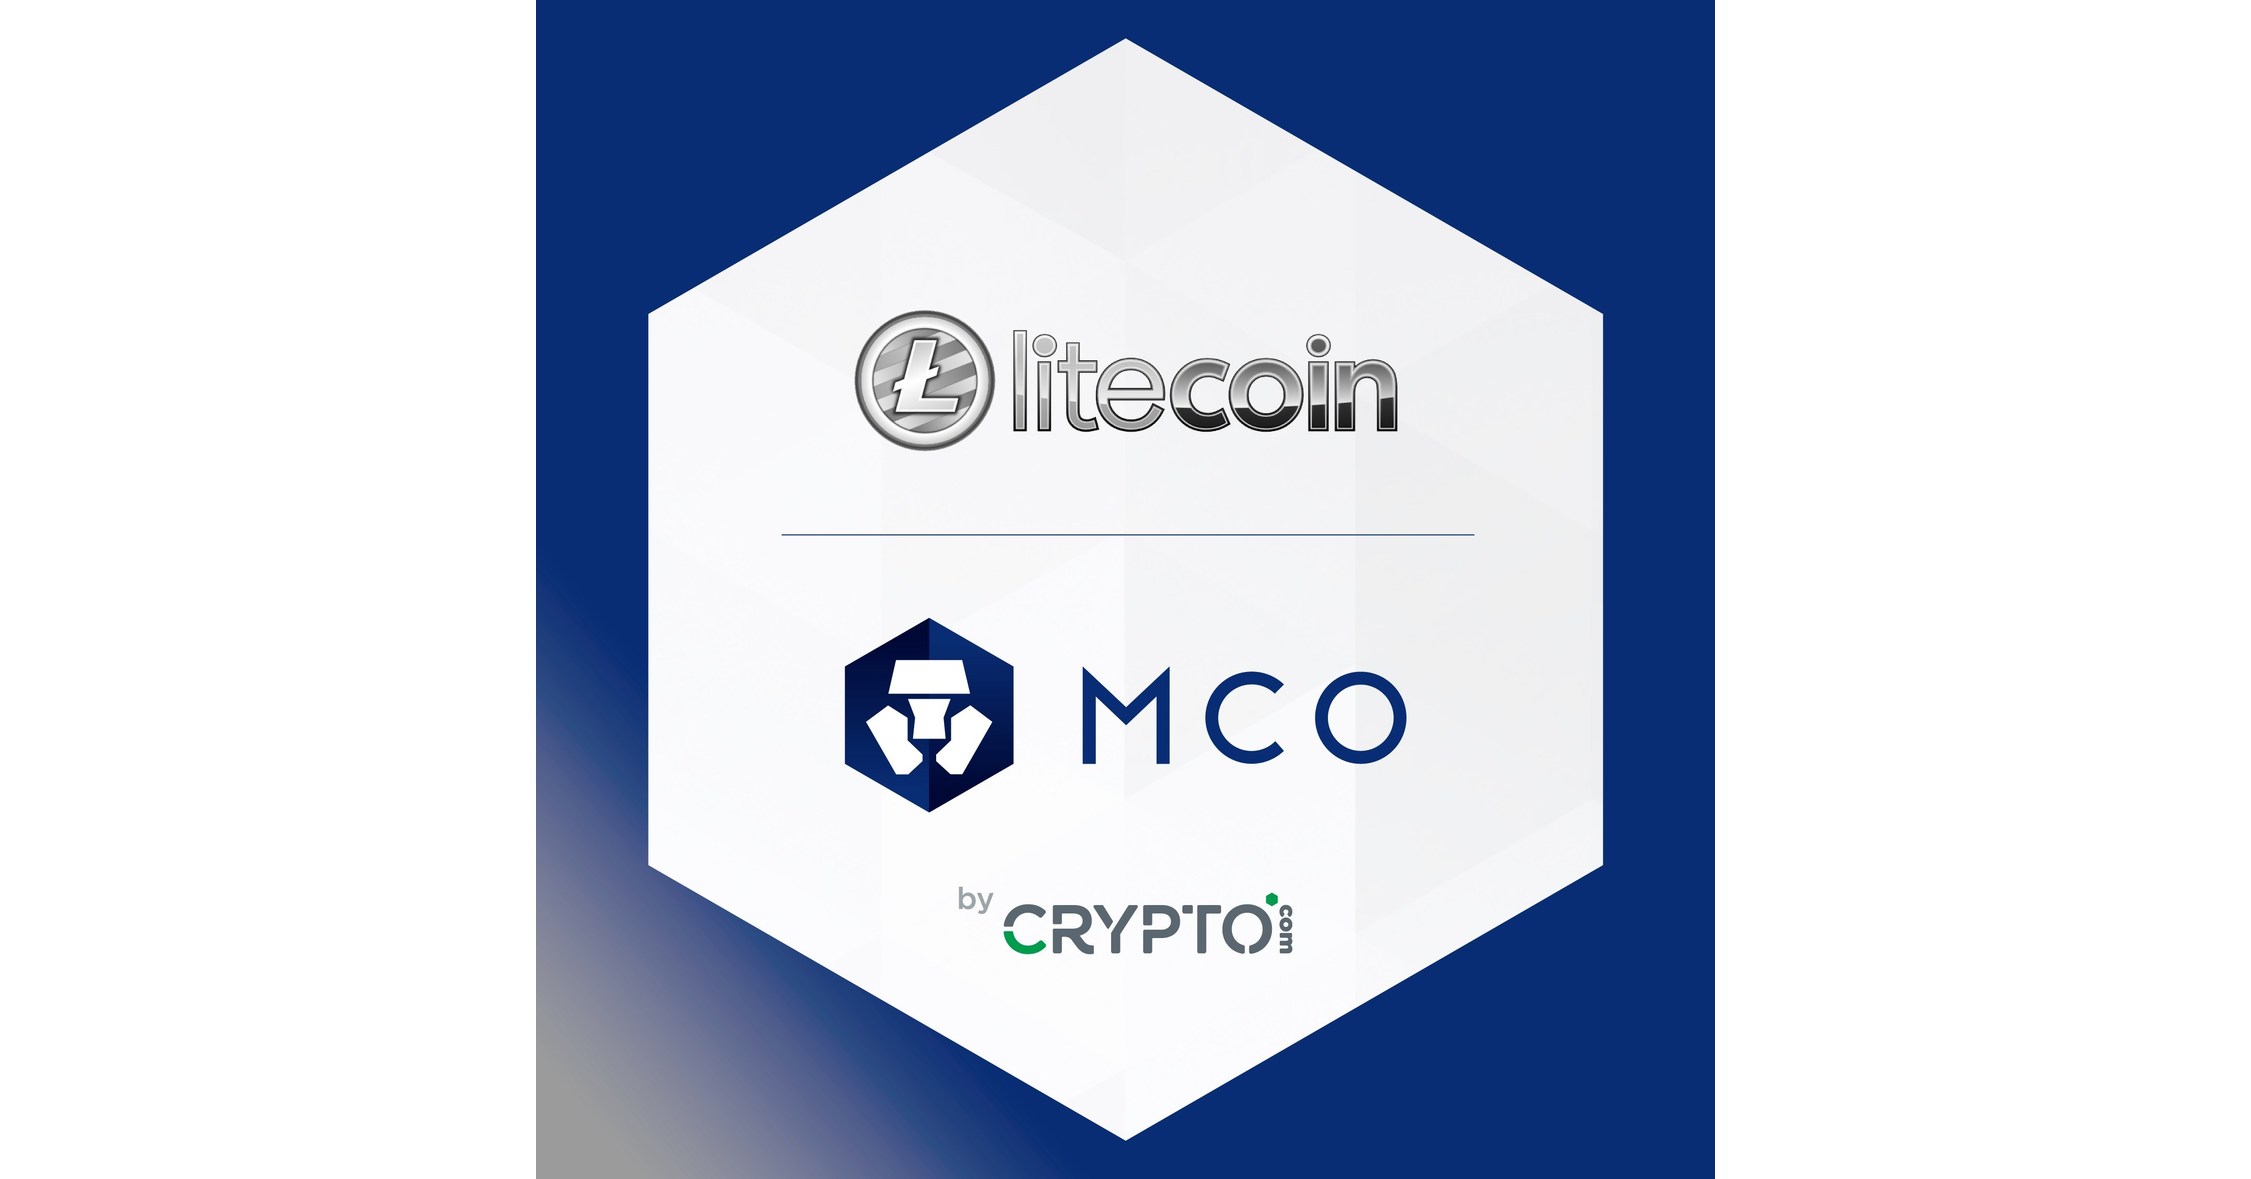 CRYPTO.com Welcomes Litecoin to the MCO Cryptocurrency ...